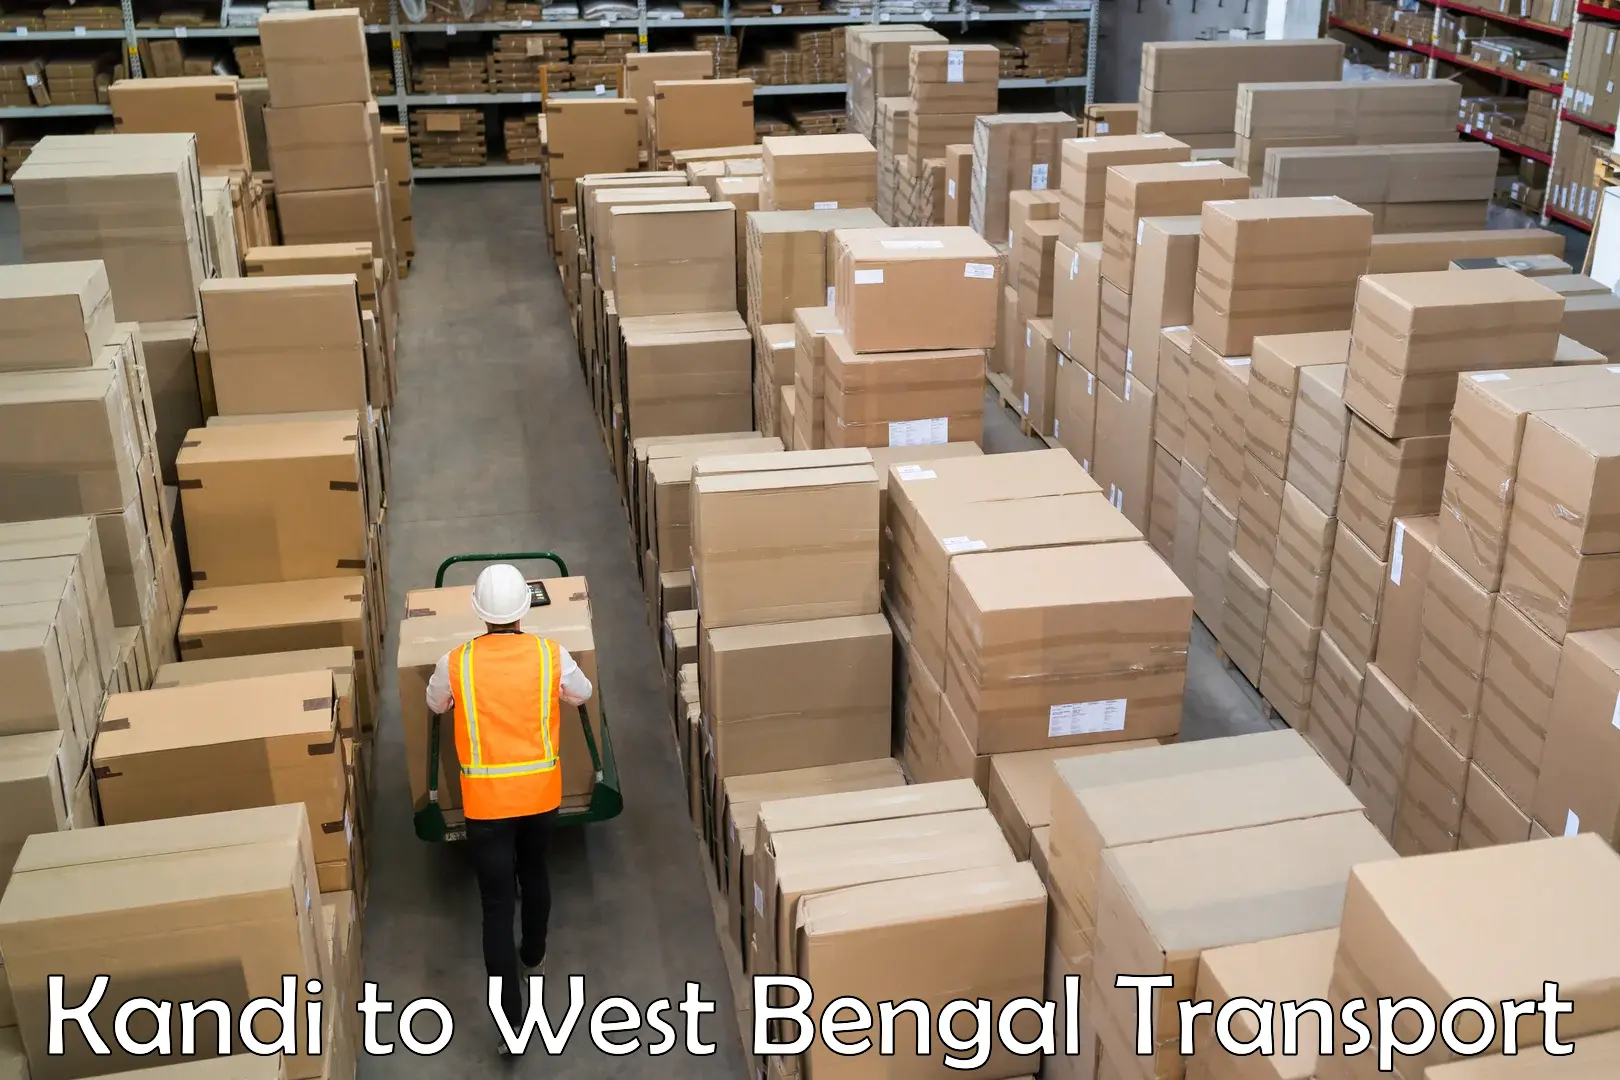 Goods delivery service Kandi to West Bengal